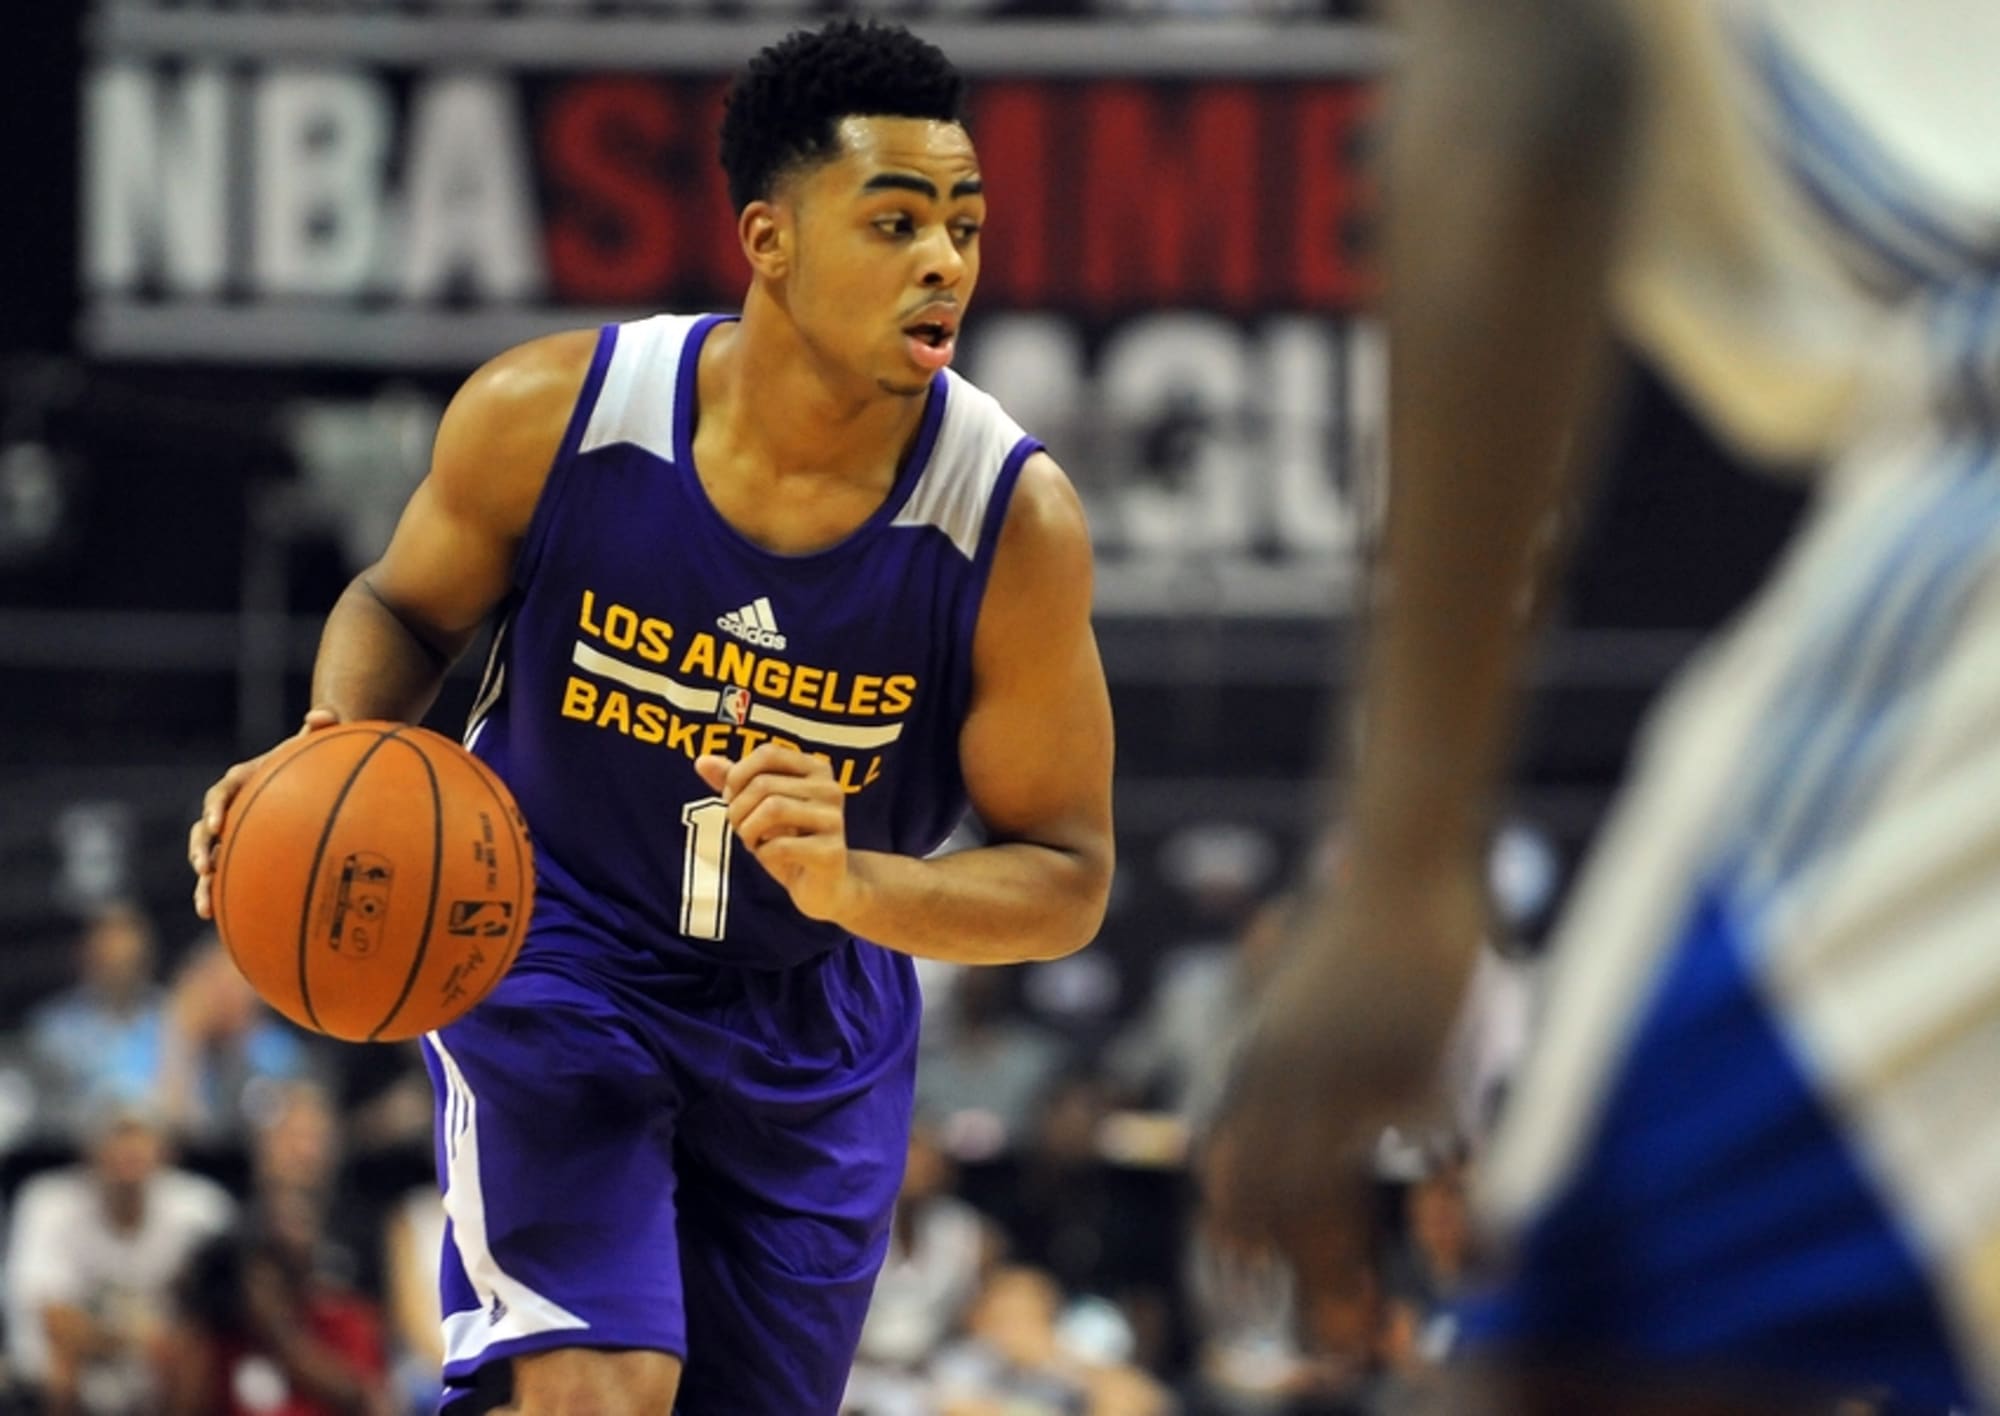 D'Angelo Russell  Los angeles lakers players, Nba players